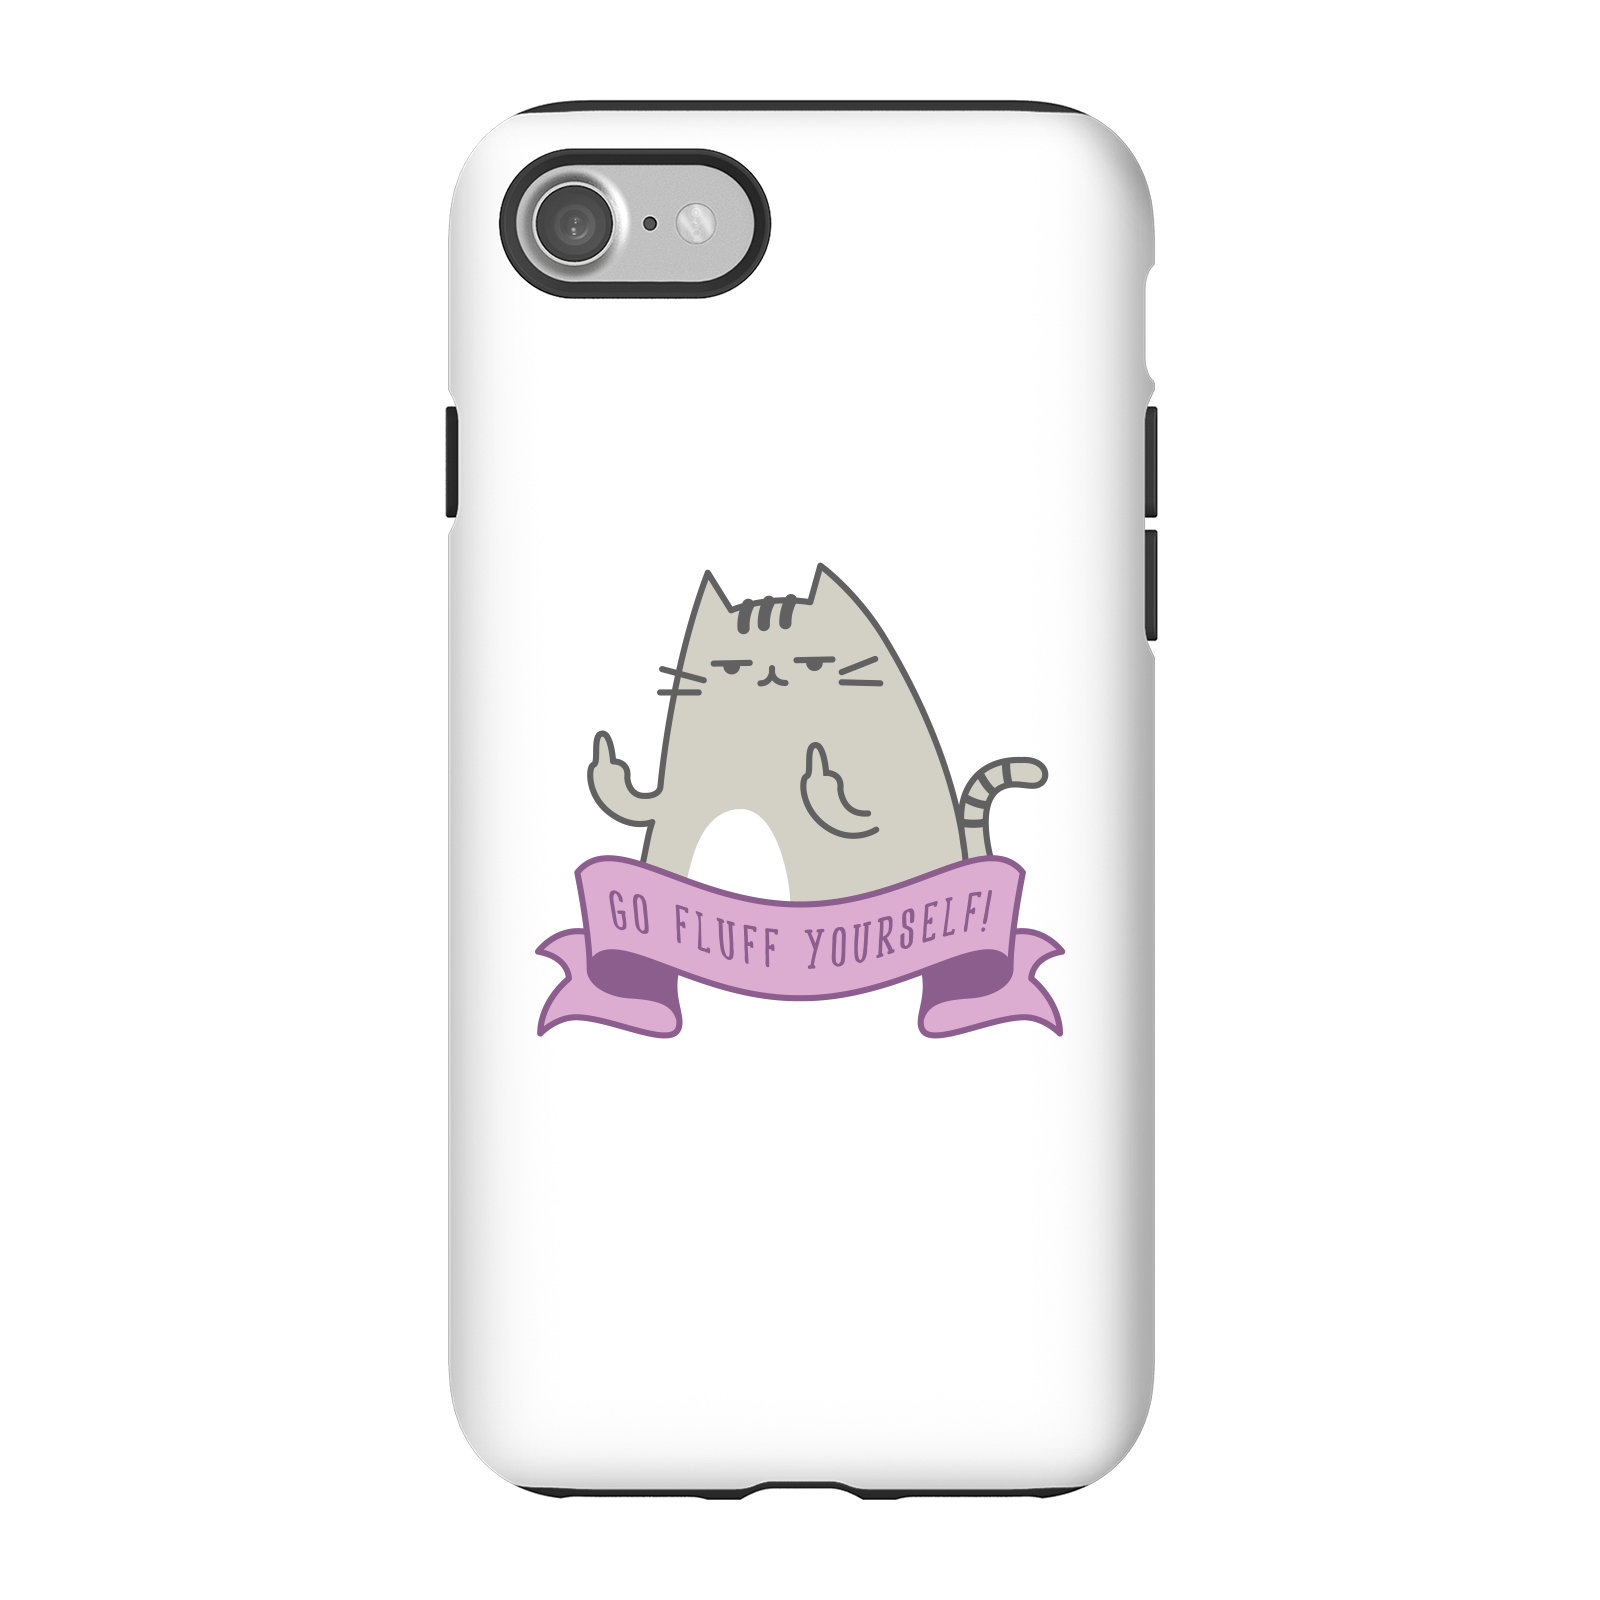 Go Fluff Yourself! Phone Case for iPhone and Android - iPhone 7 - Tough Case - Matte